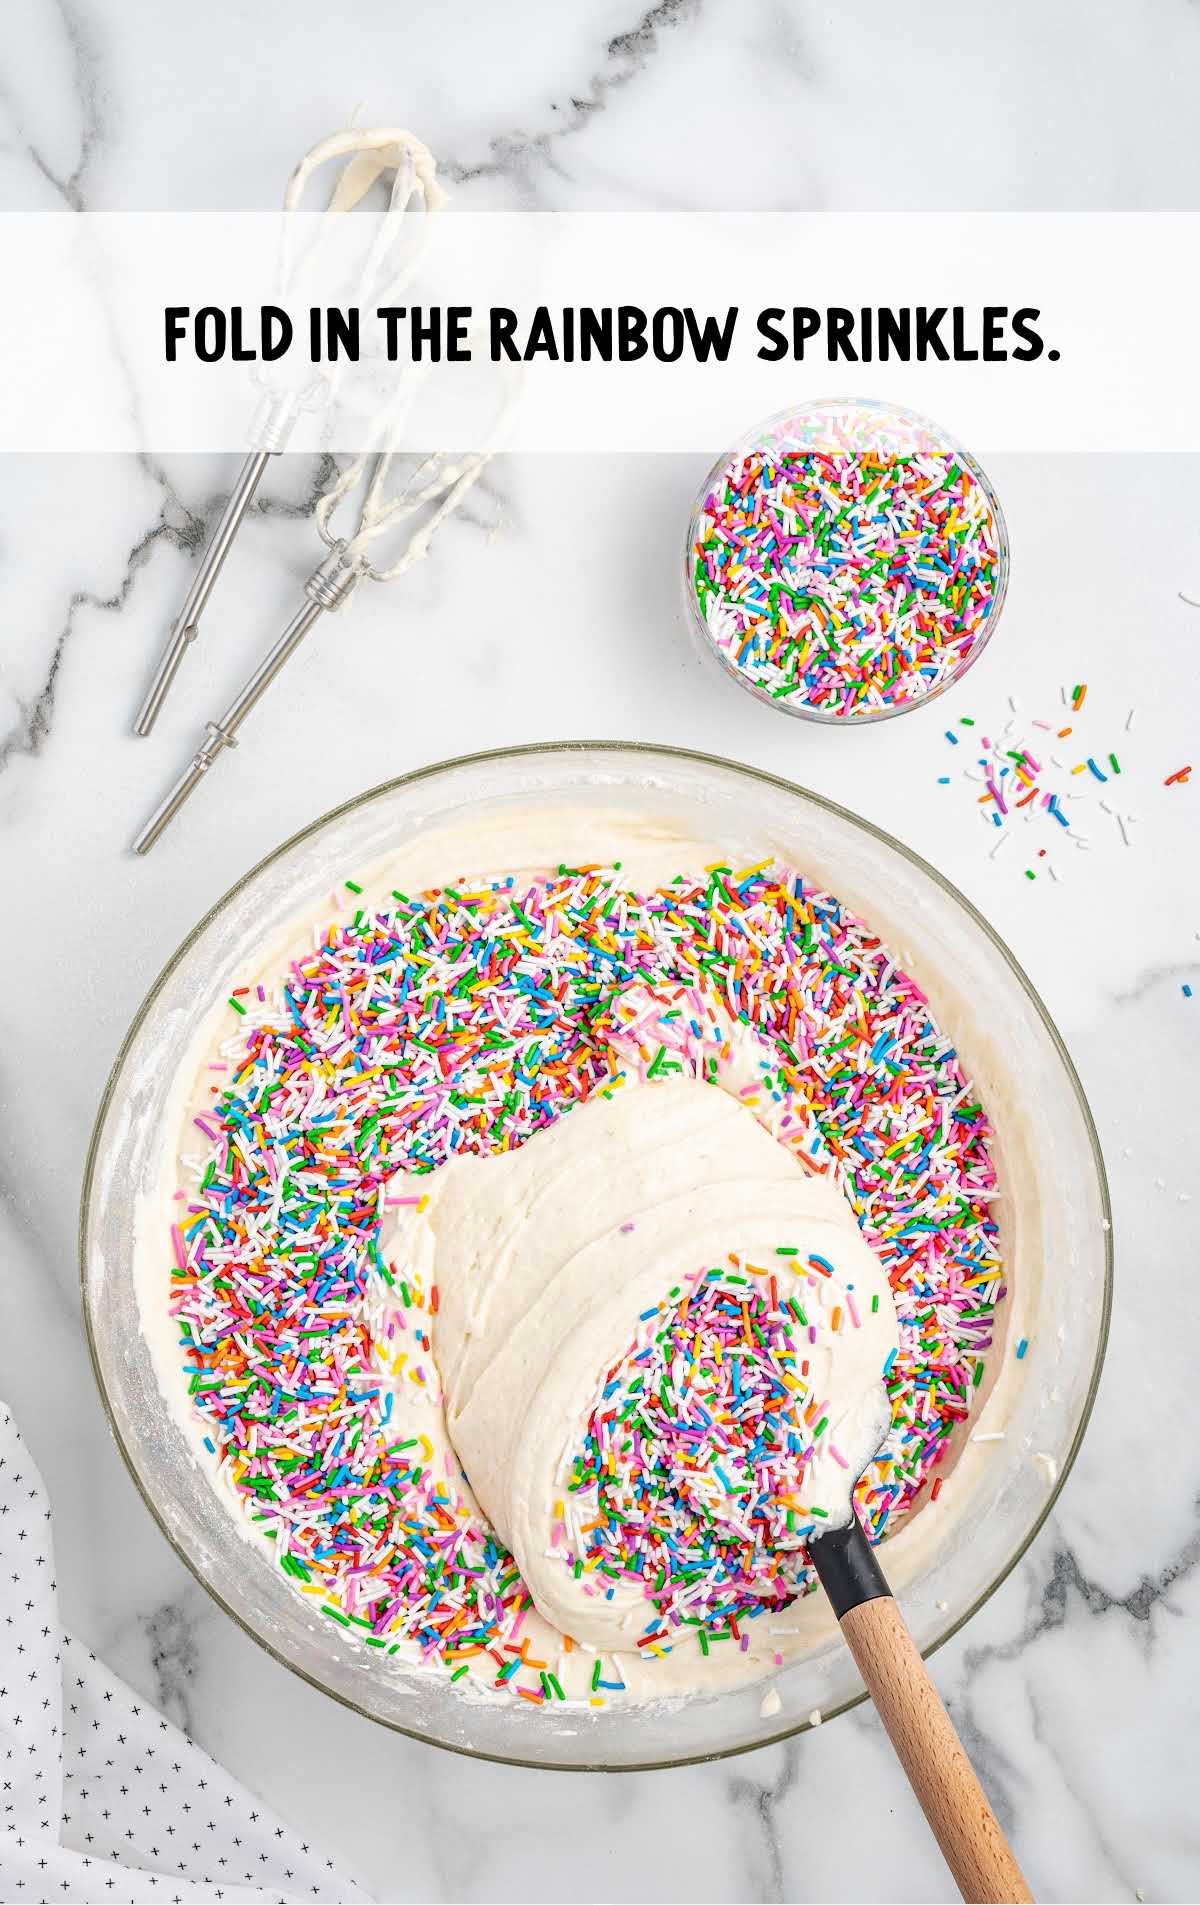 rainbow sprinkles folded into the cake batter in a bowl